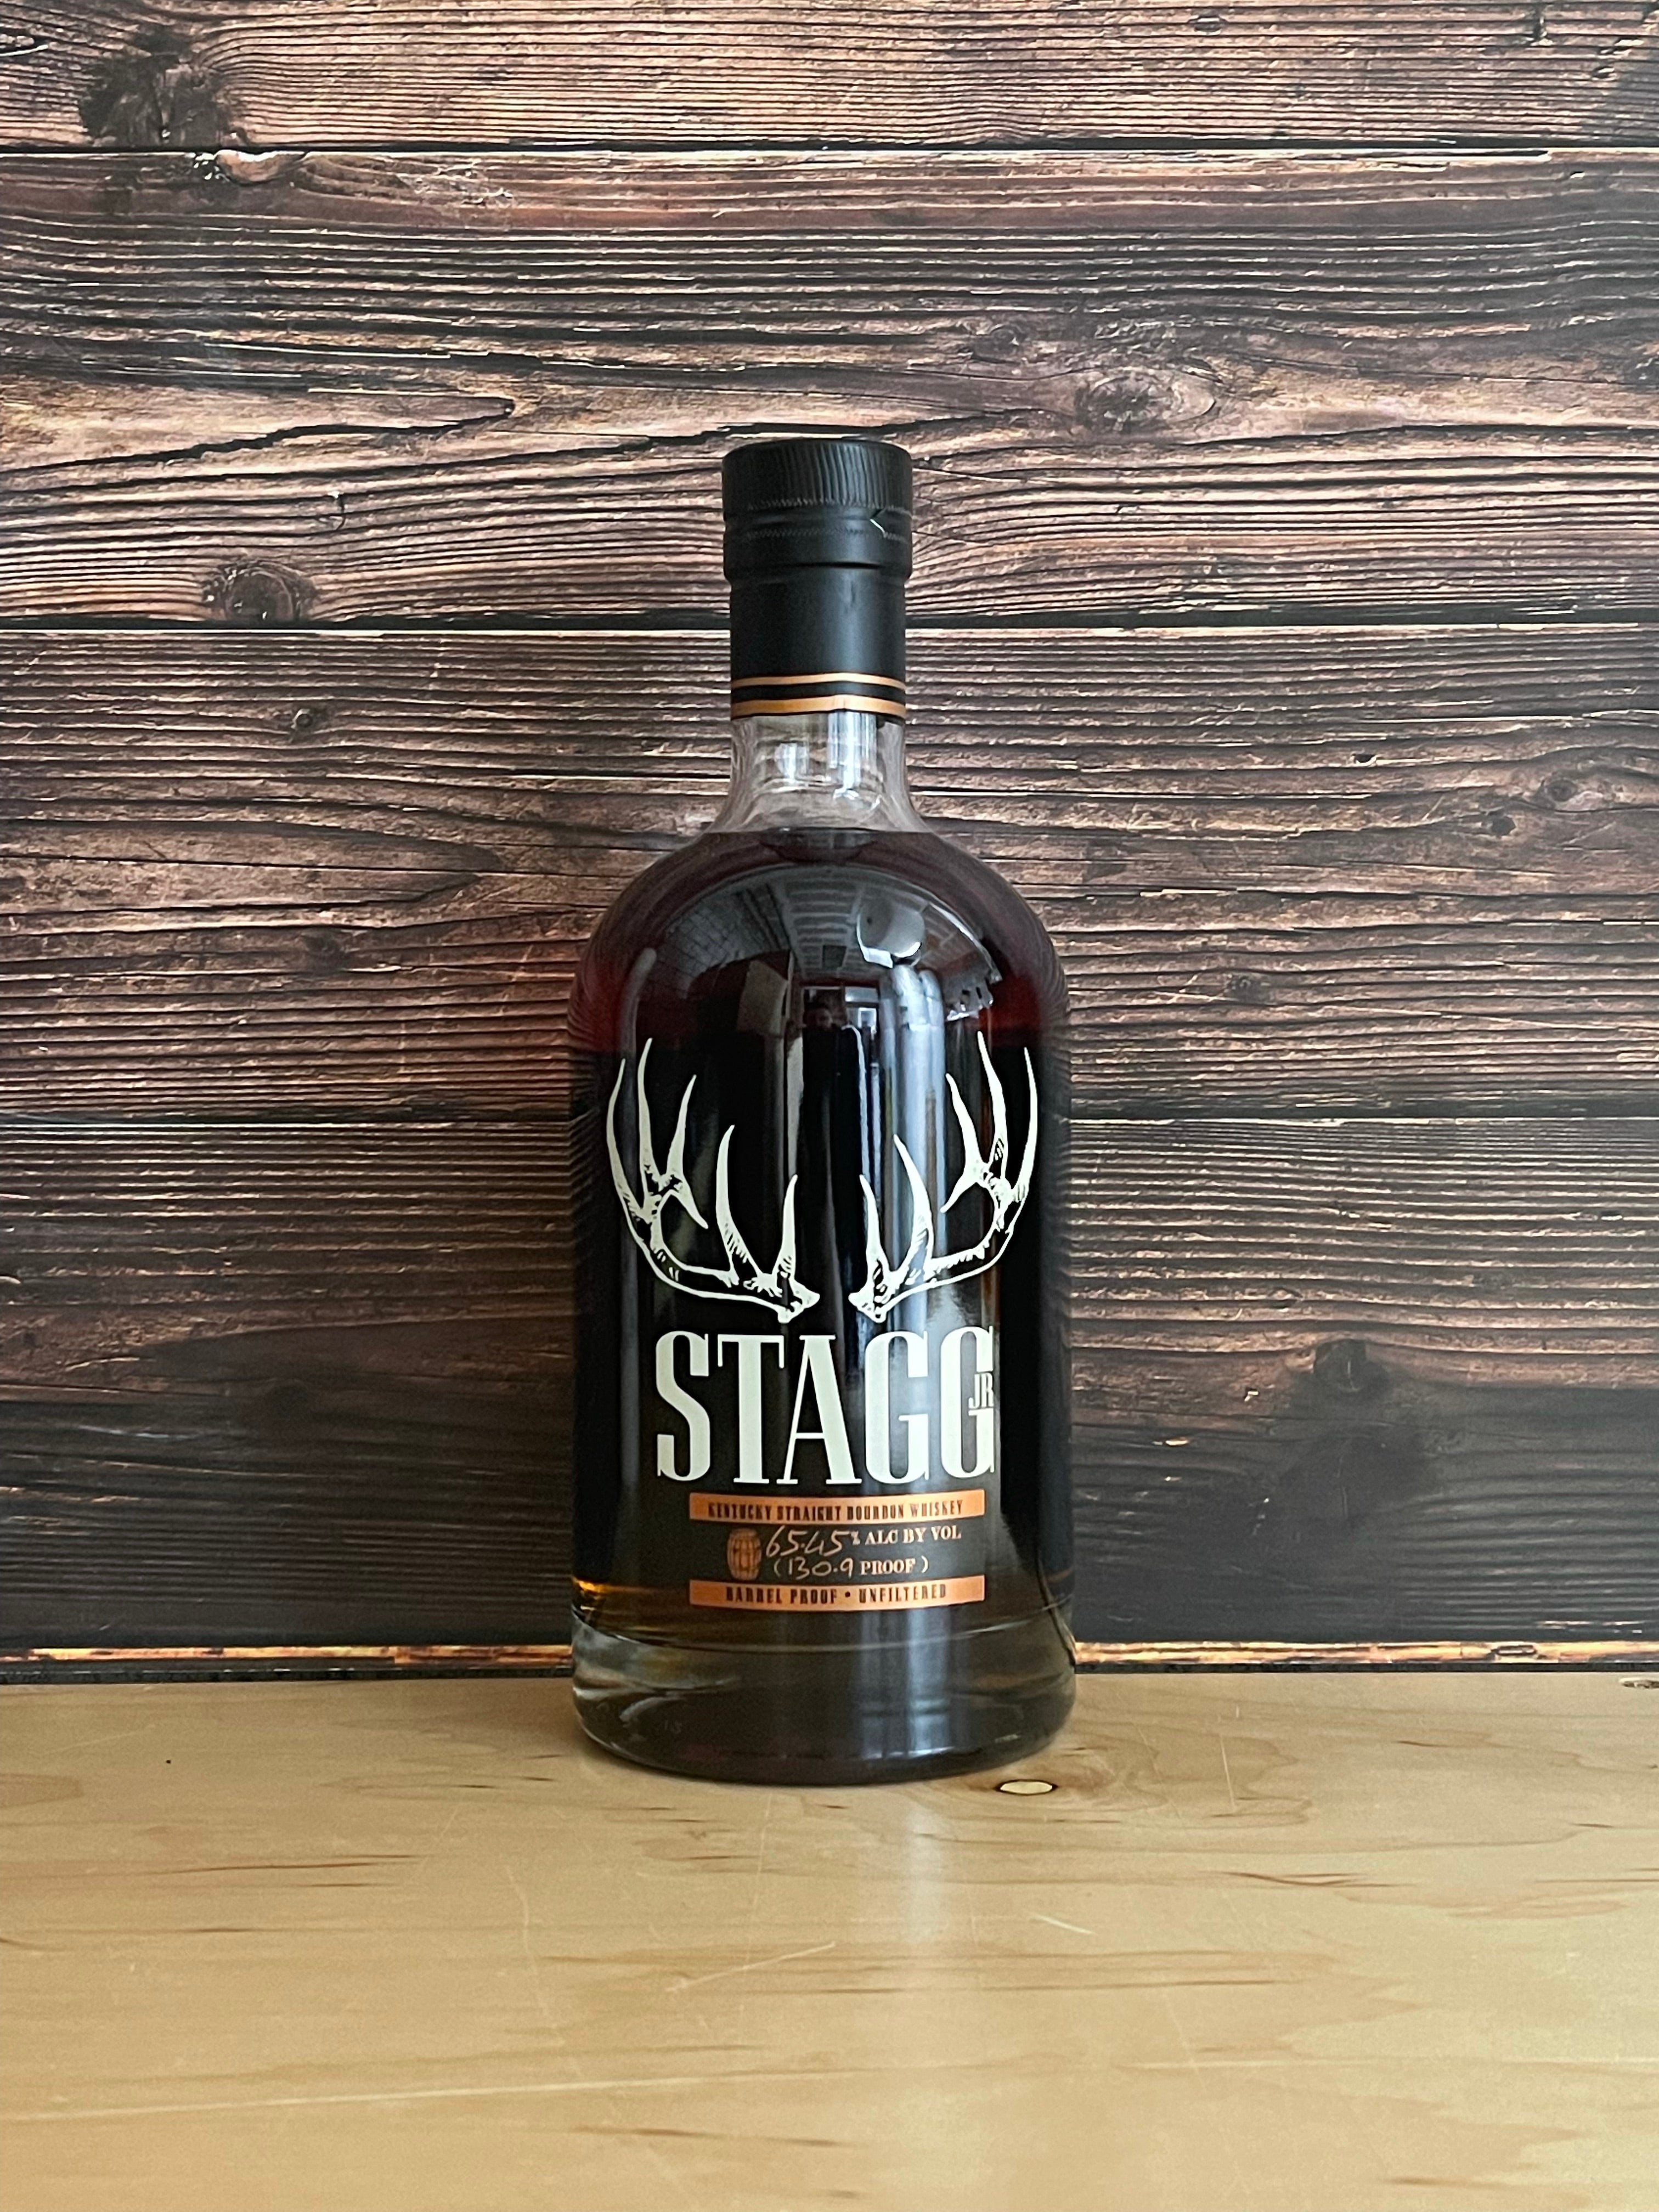 Stagg Jr Straight Bourbon Whiskey 125.9 Proof